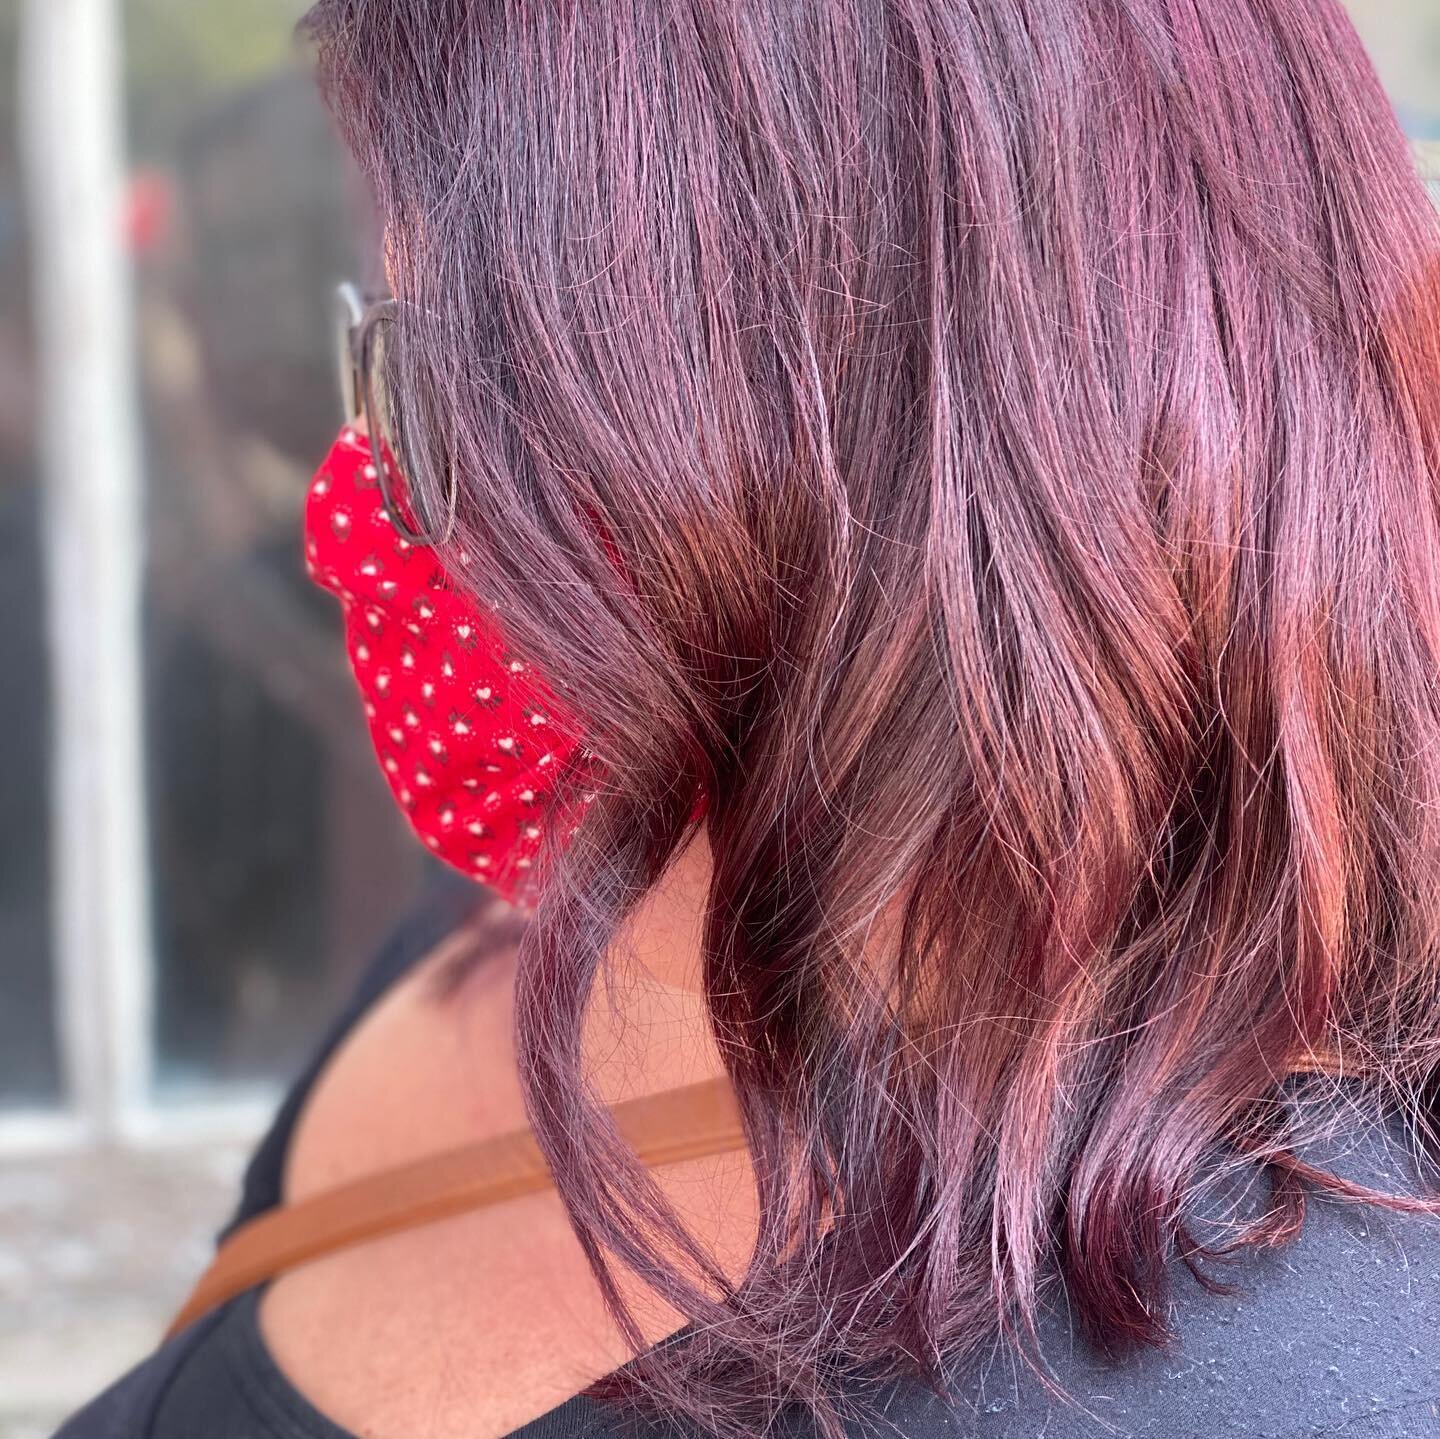 Grape inspiration! So much fun creating a new look!🥰#gorgeoushair #olaplexlove #heathyshinyhair #summervibes #milkshakecreativecolor #beforeandafter #lovewhatyoudodowhatyoulove #acceptingnewclients #greatereasthamptonchamberofcommerce #behindthechai